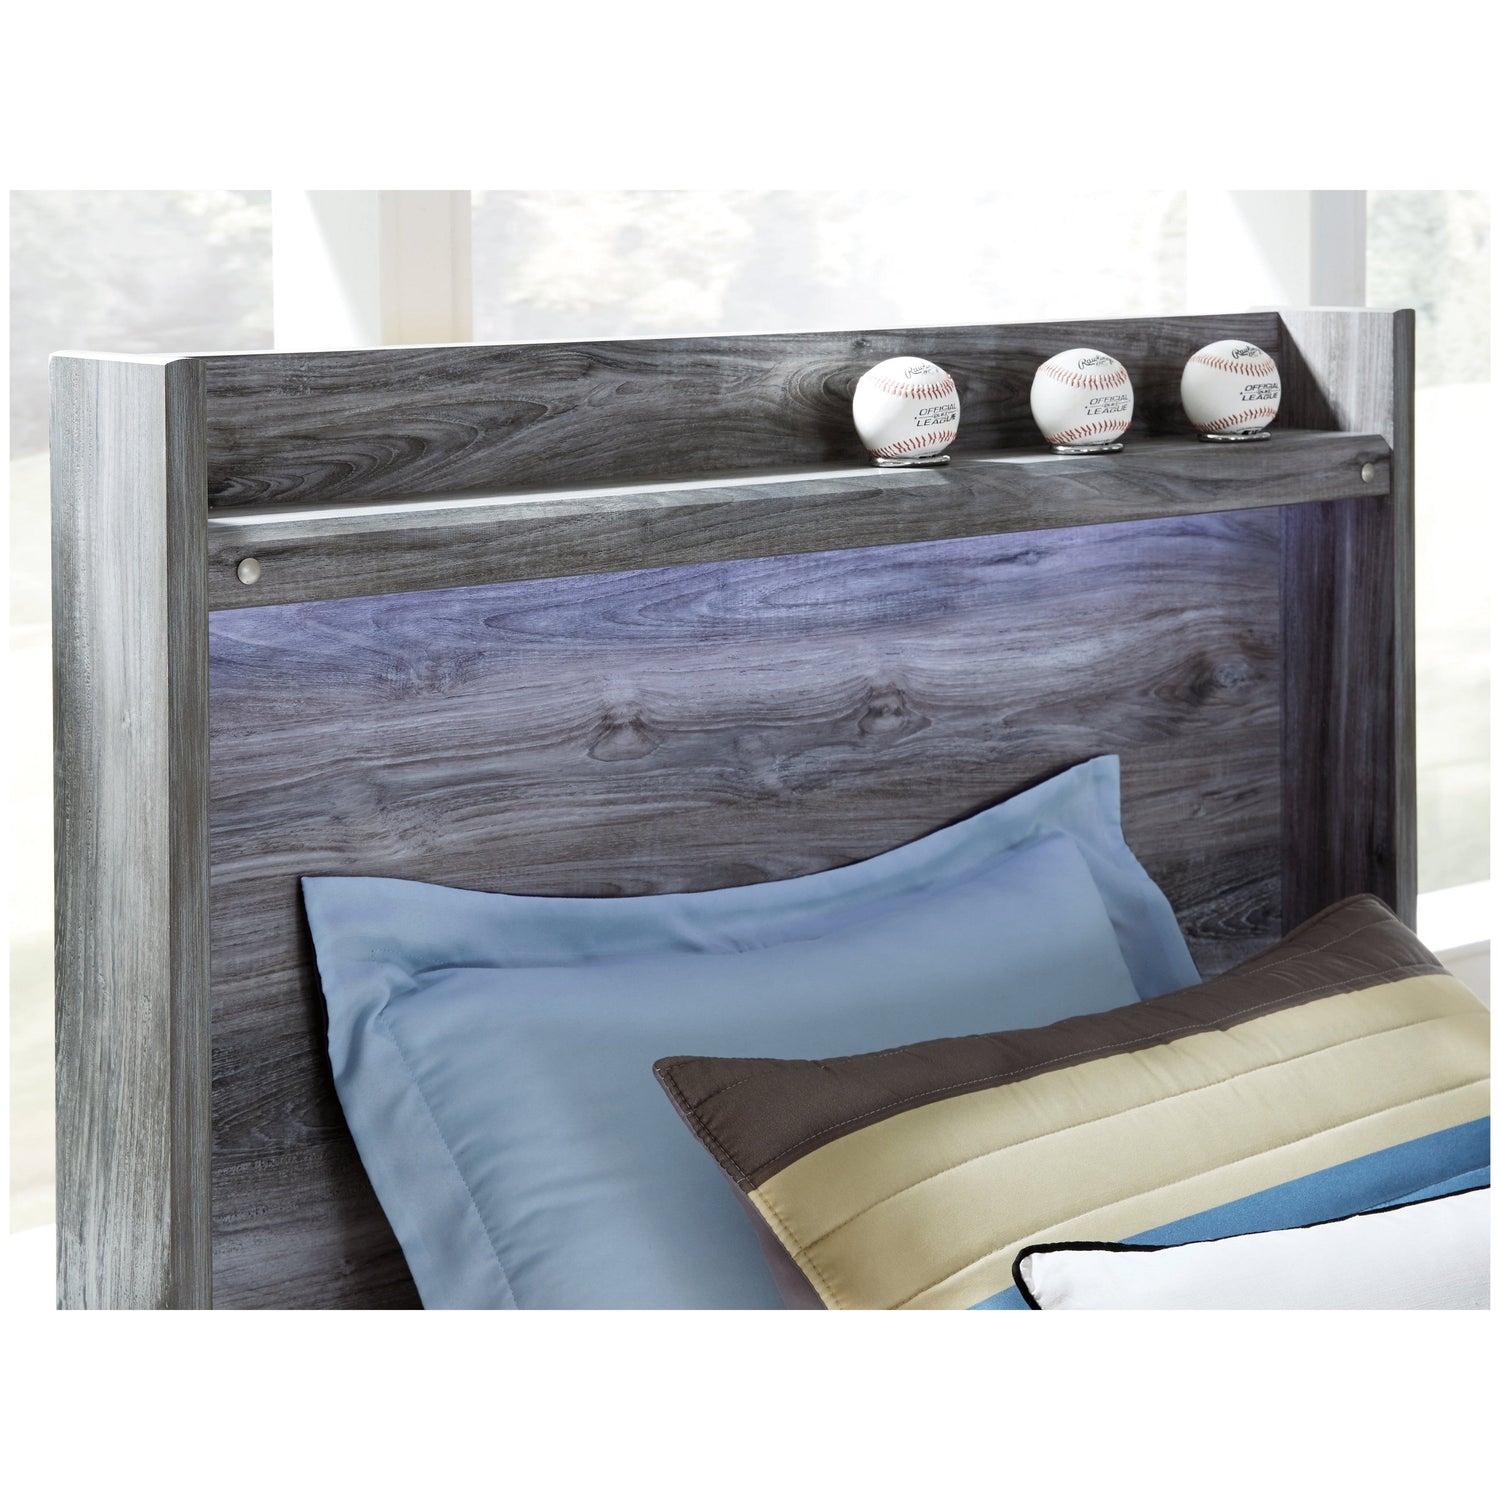 Baystorm Panel Bed with 6 Storage Drawers